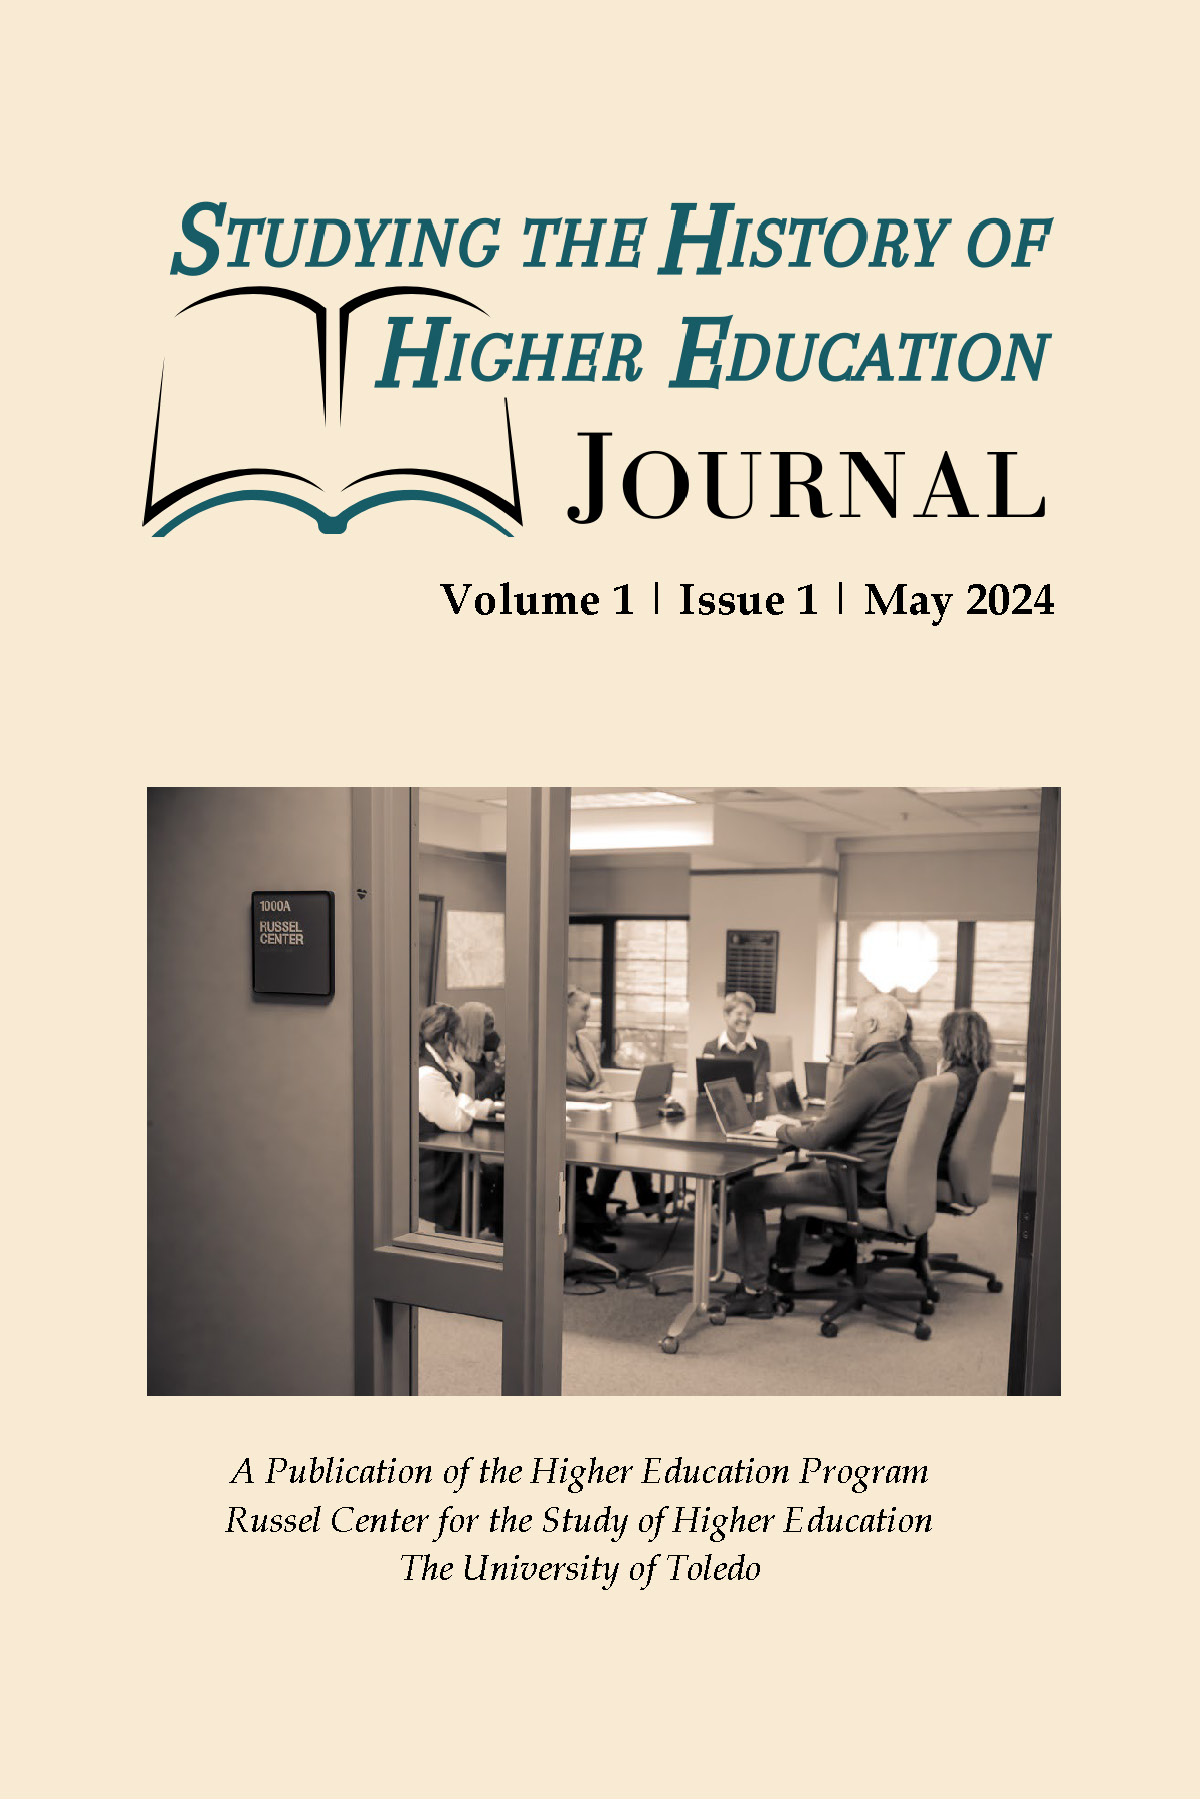 Image of the Studying the History of Higher Education Journal Volume 1 Issue 1 May 2024 a publication of the Higher Education Program Russel Center at The University of Toledo